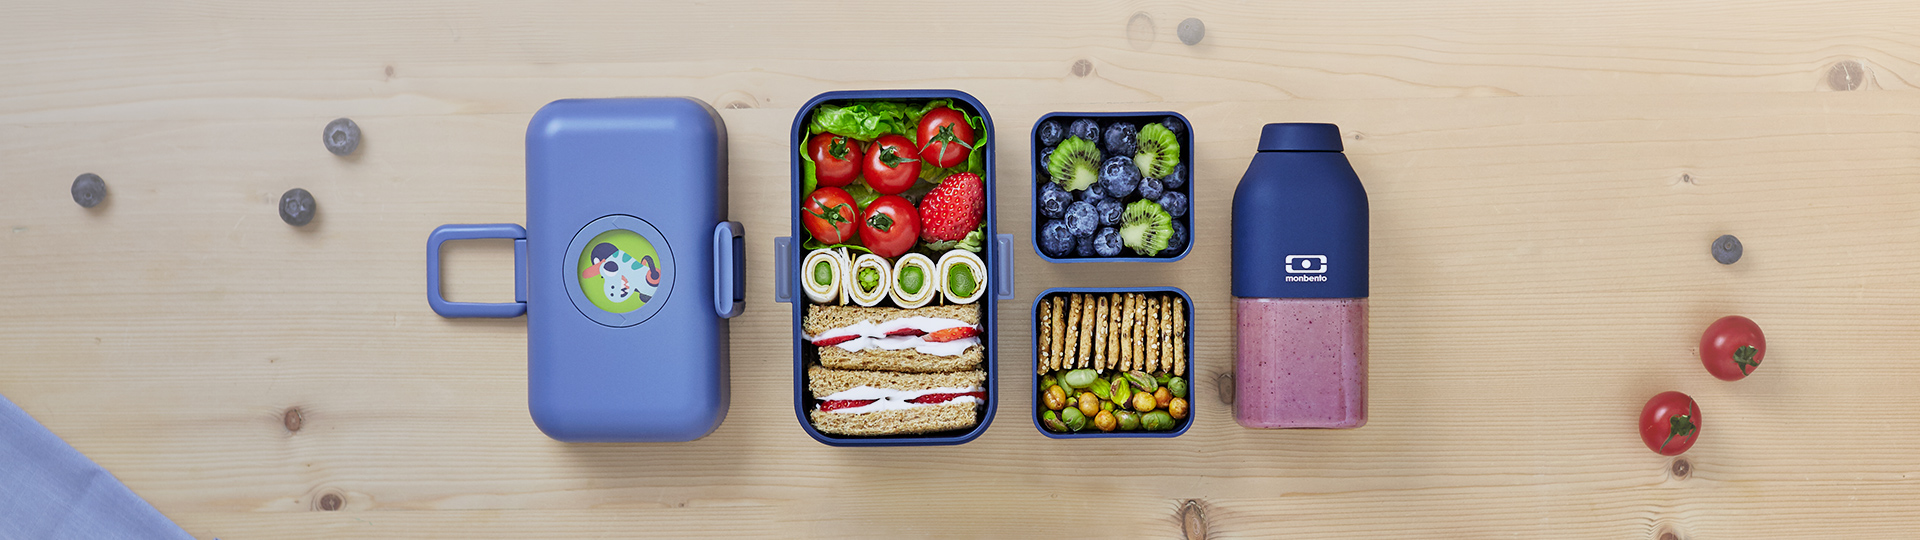 Kids monbento Collection - Lunch box - Snack box - Reusable Bottle - Cutlery